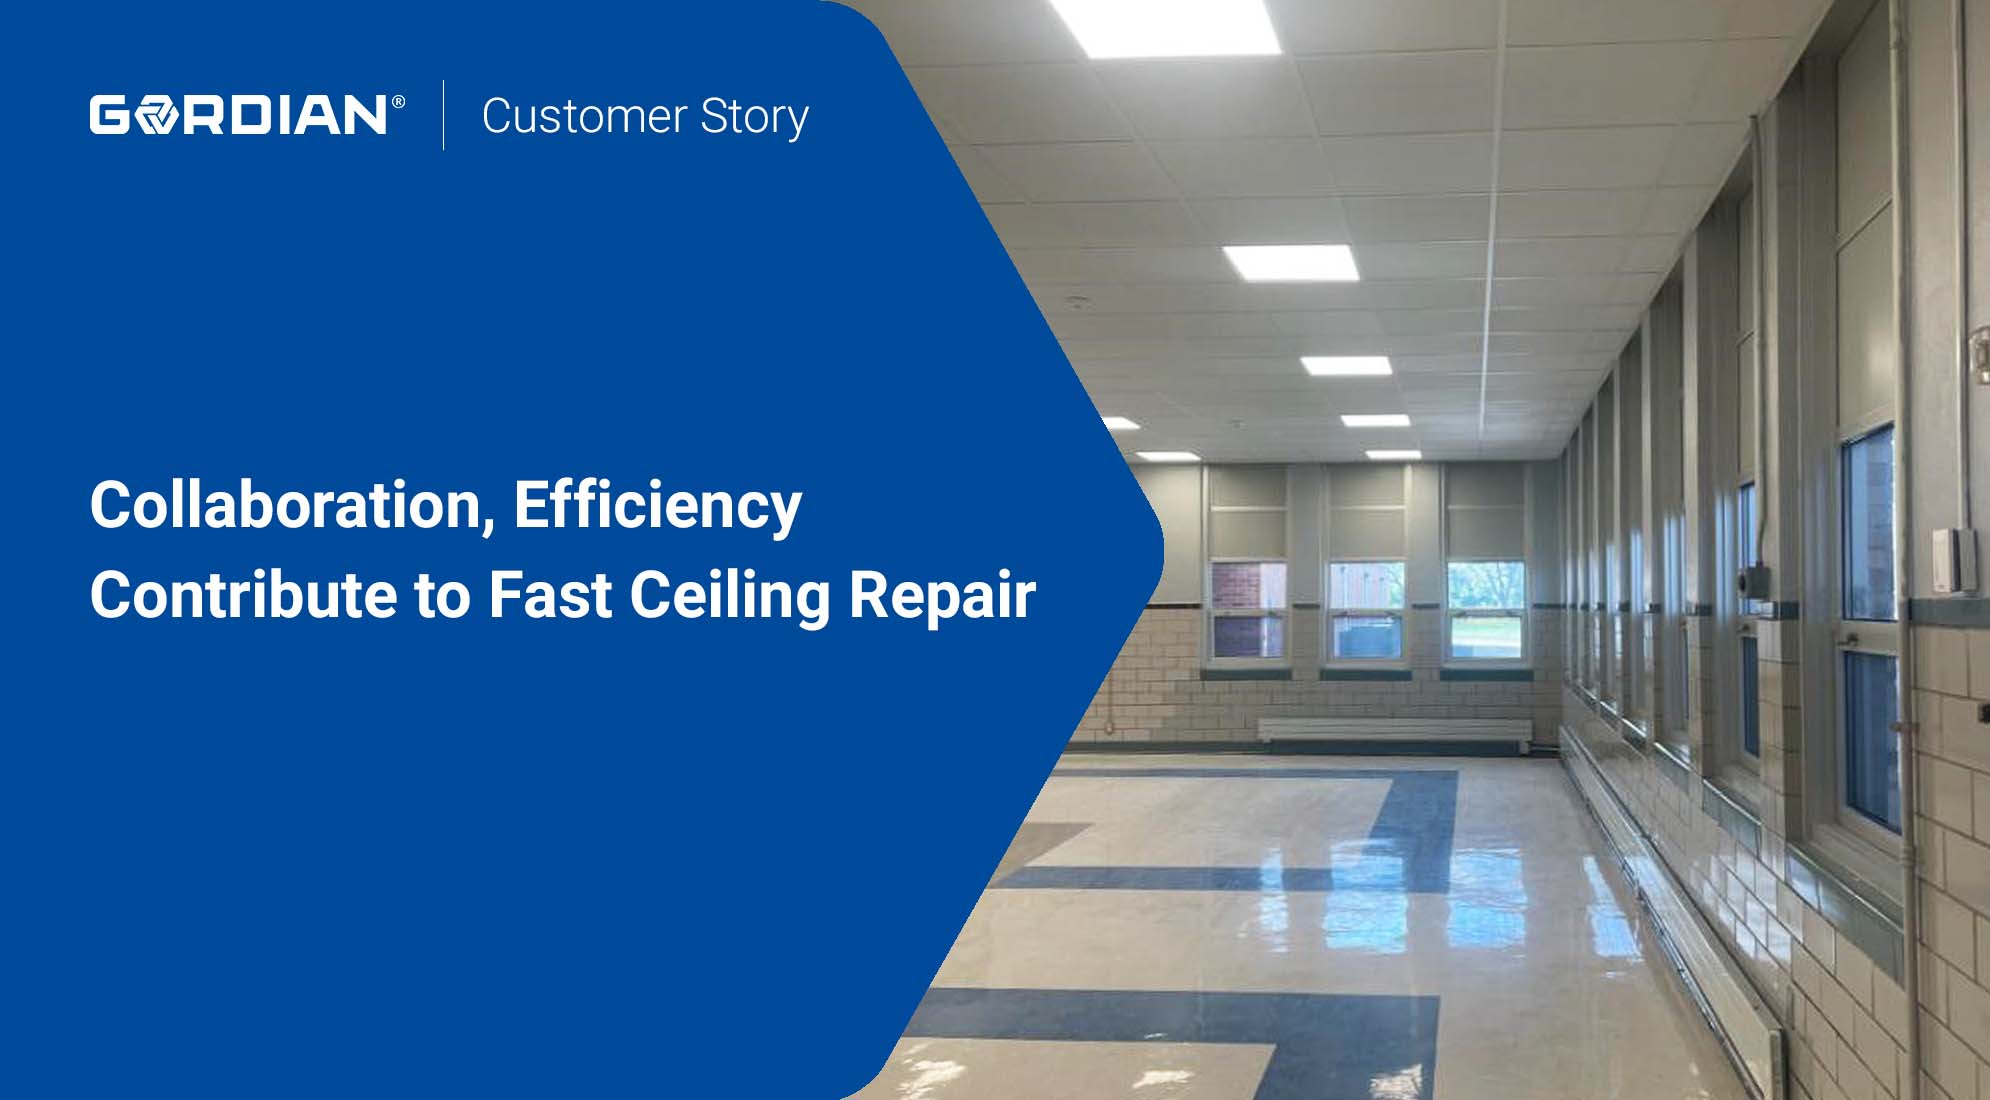 Rural School Cafeteria Renovated Quickly with ezIQC®️ 1